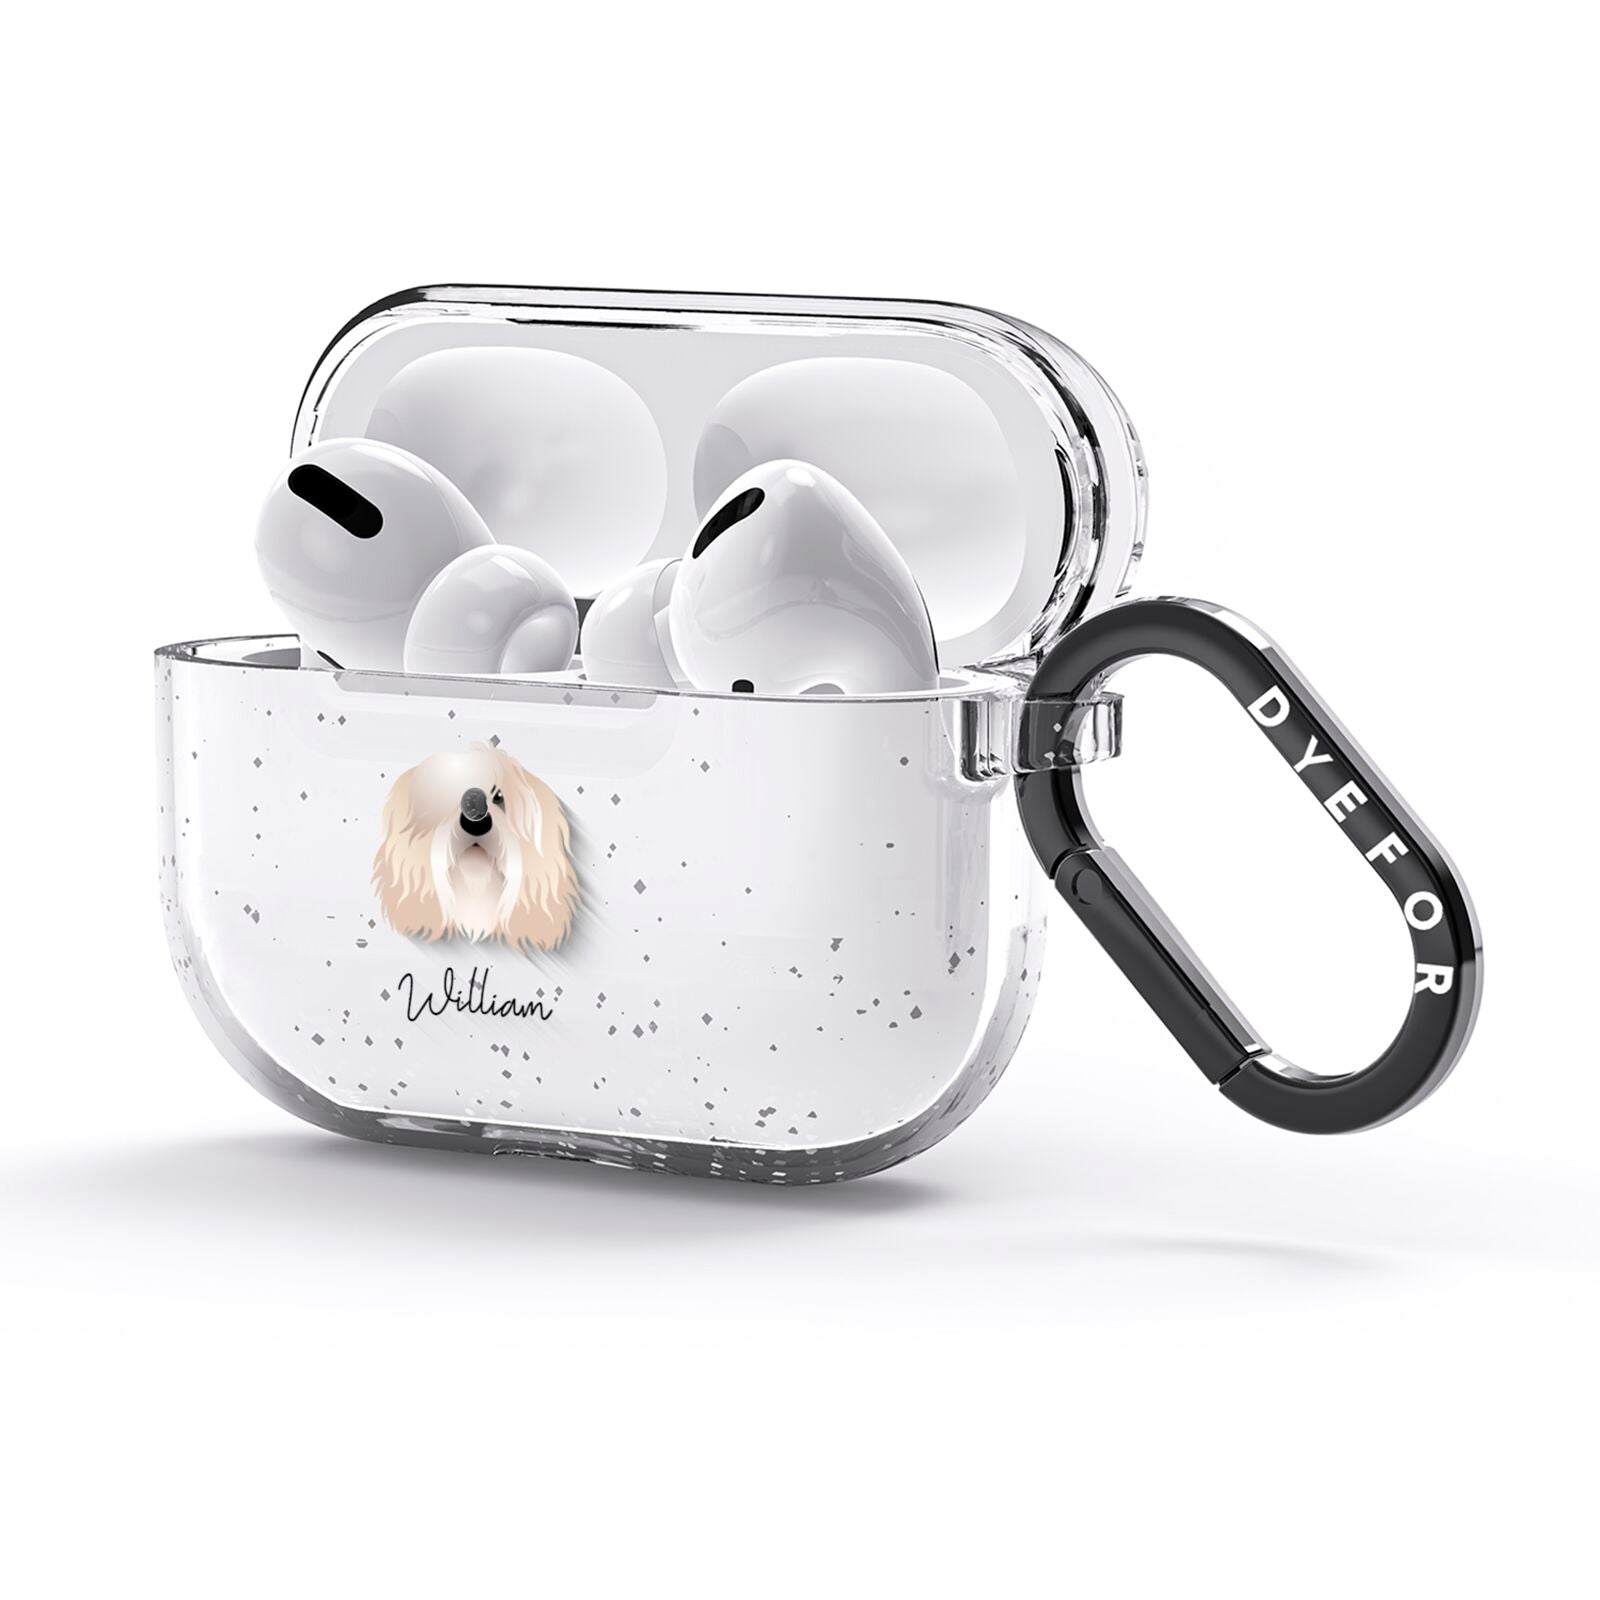 Polish Lowland Sheepdog Personalised AirPods Glitter Case 3rd Gen Side Image